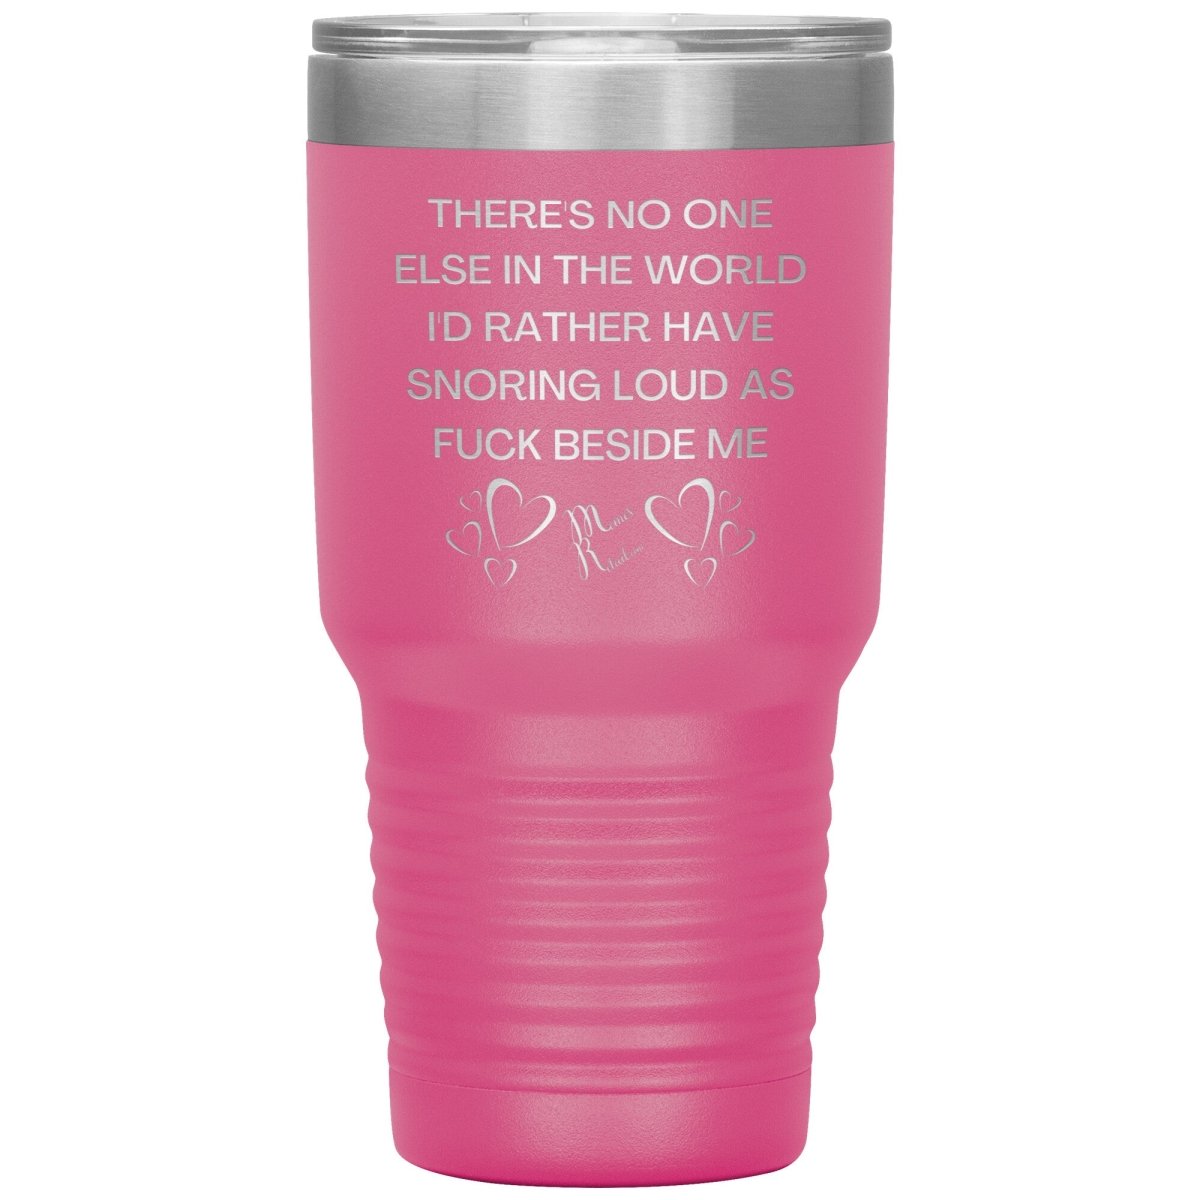 There's No One Else in the World I'd Rather Have Snoring Loud, 30oz Insulated Tumbler / Pink - MemesRetail.com